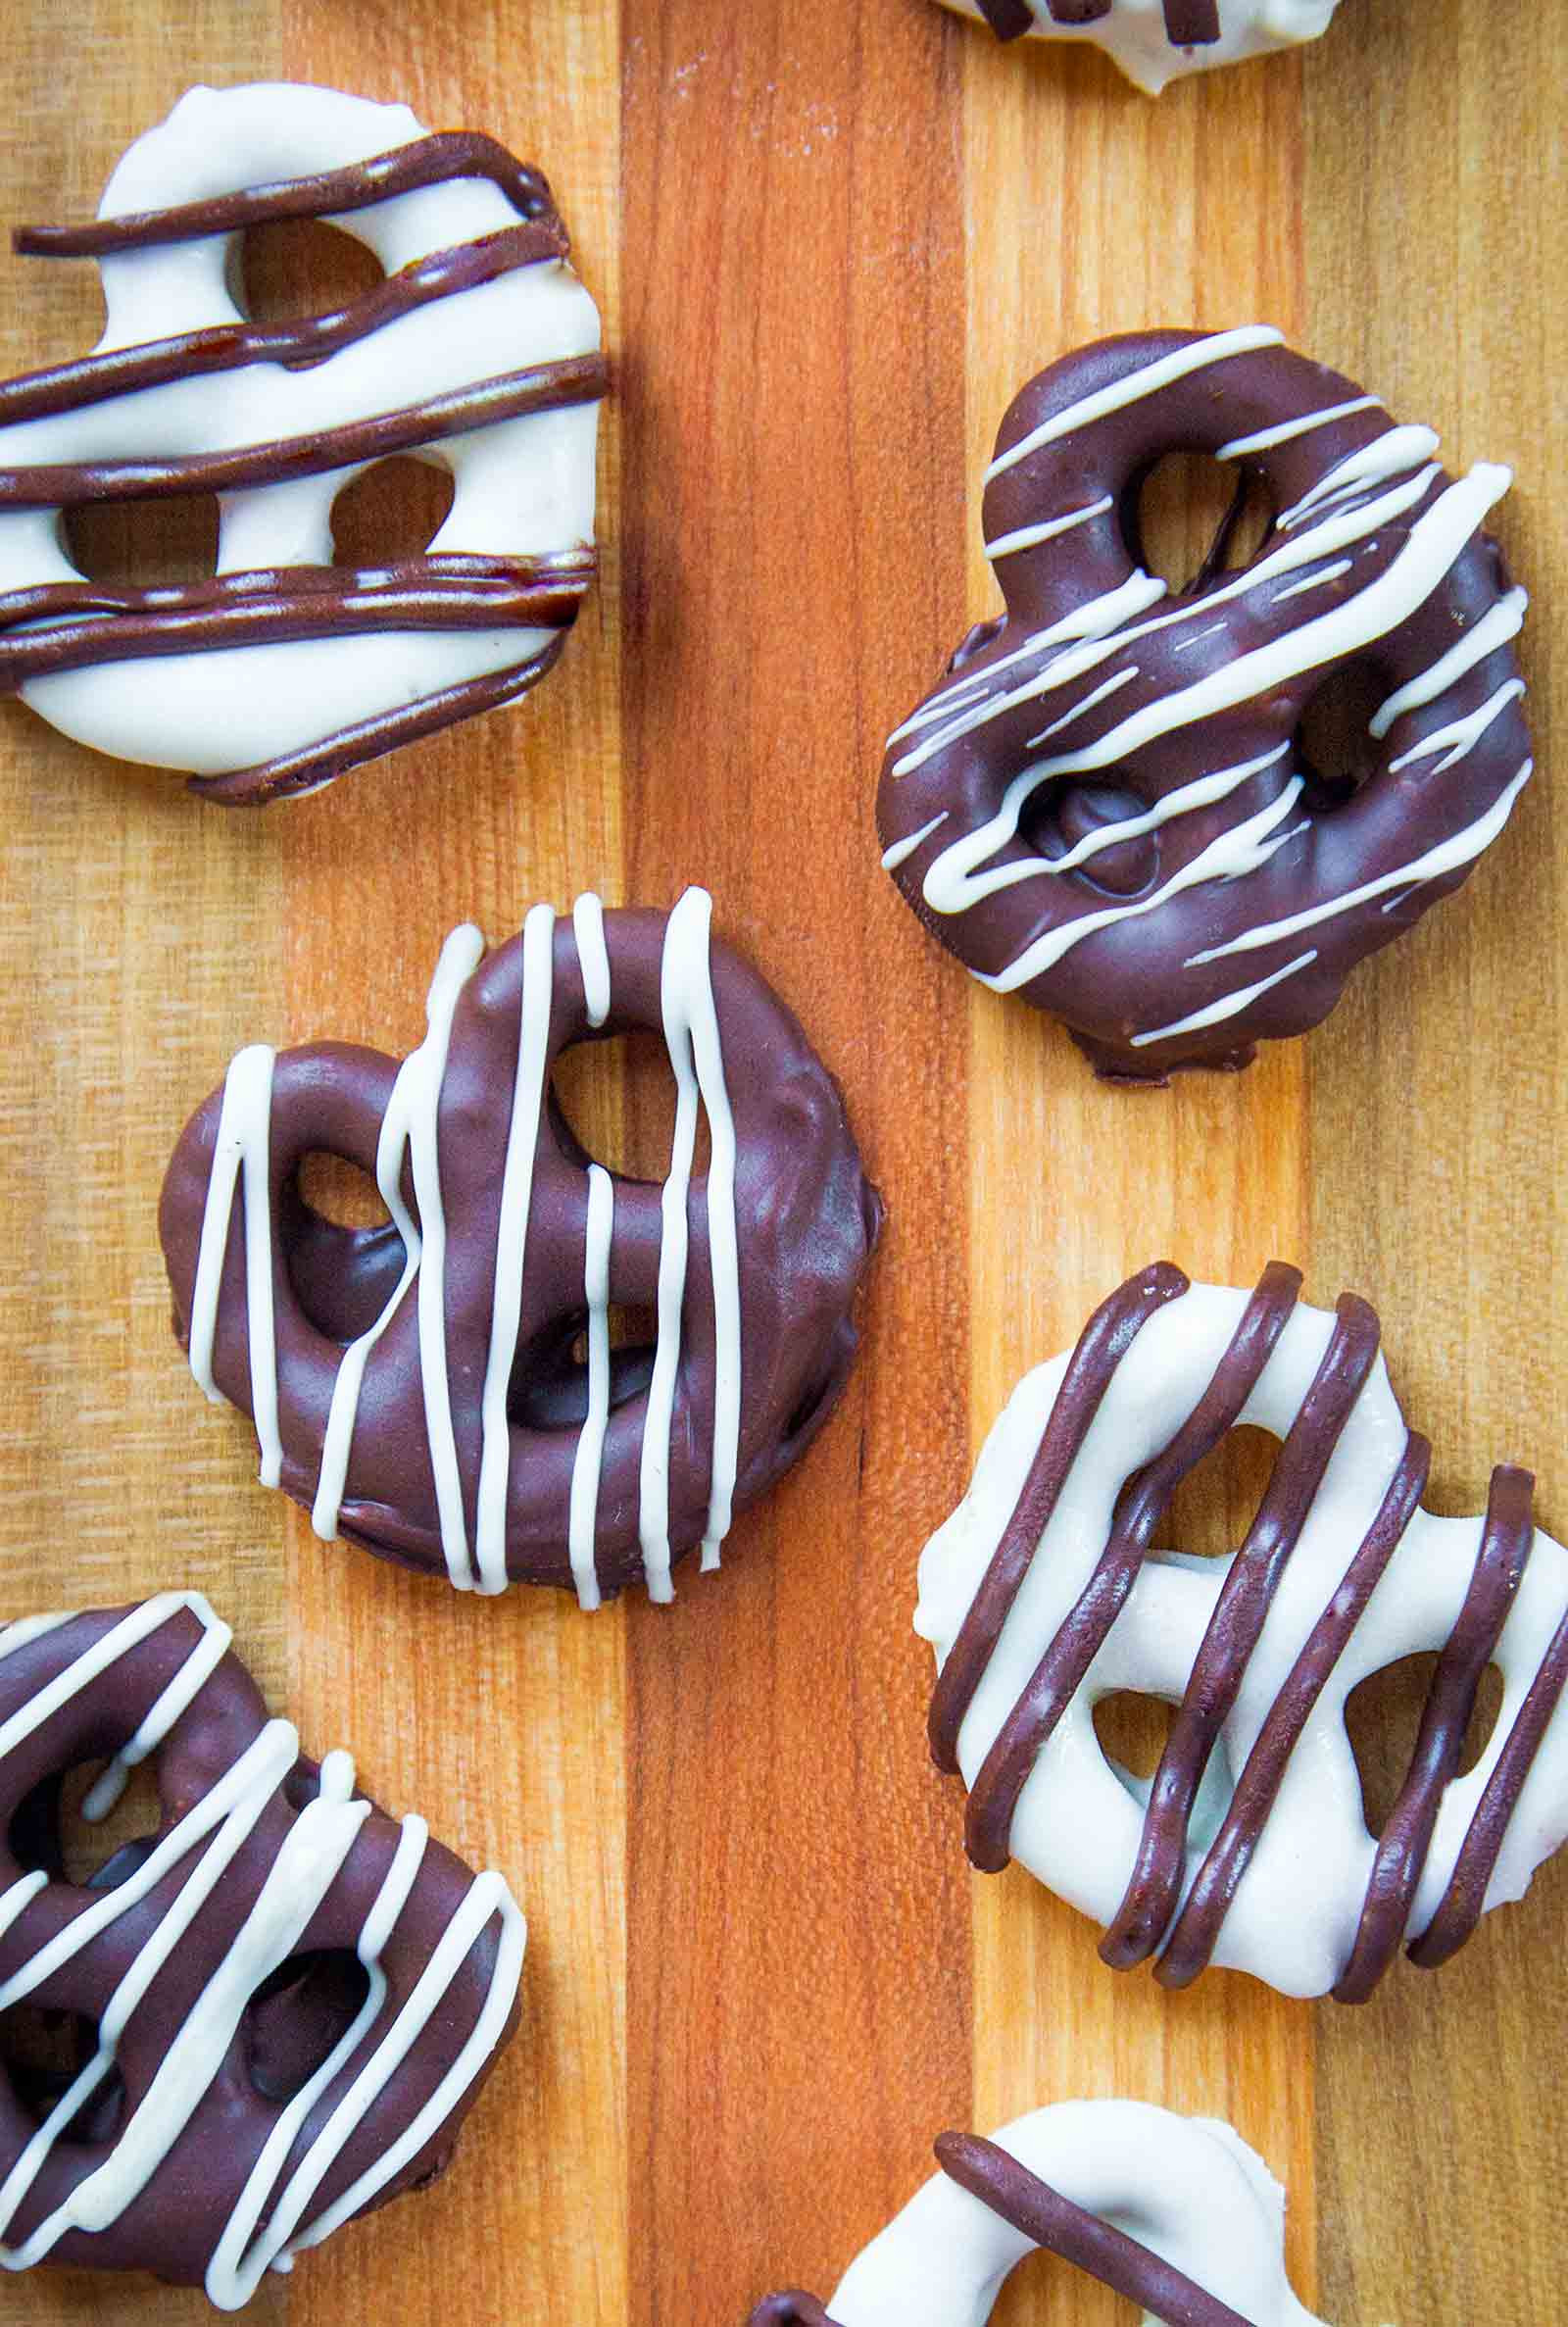 How To Make Chocolate Covered Pretzels
 Chocolate Covered Pretzels Recipe